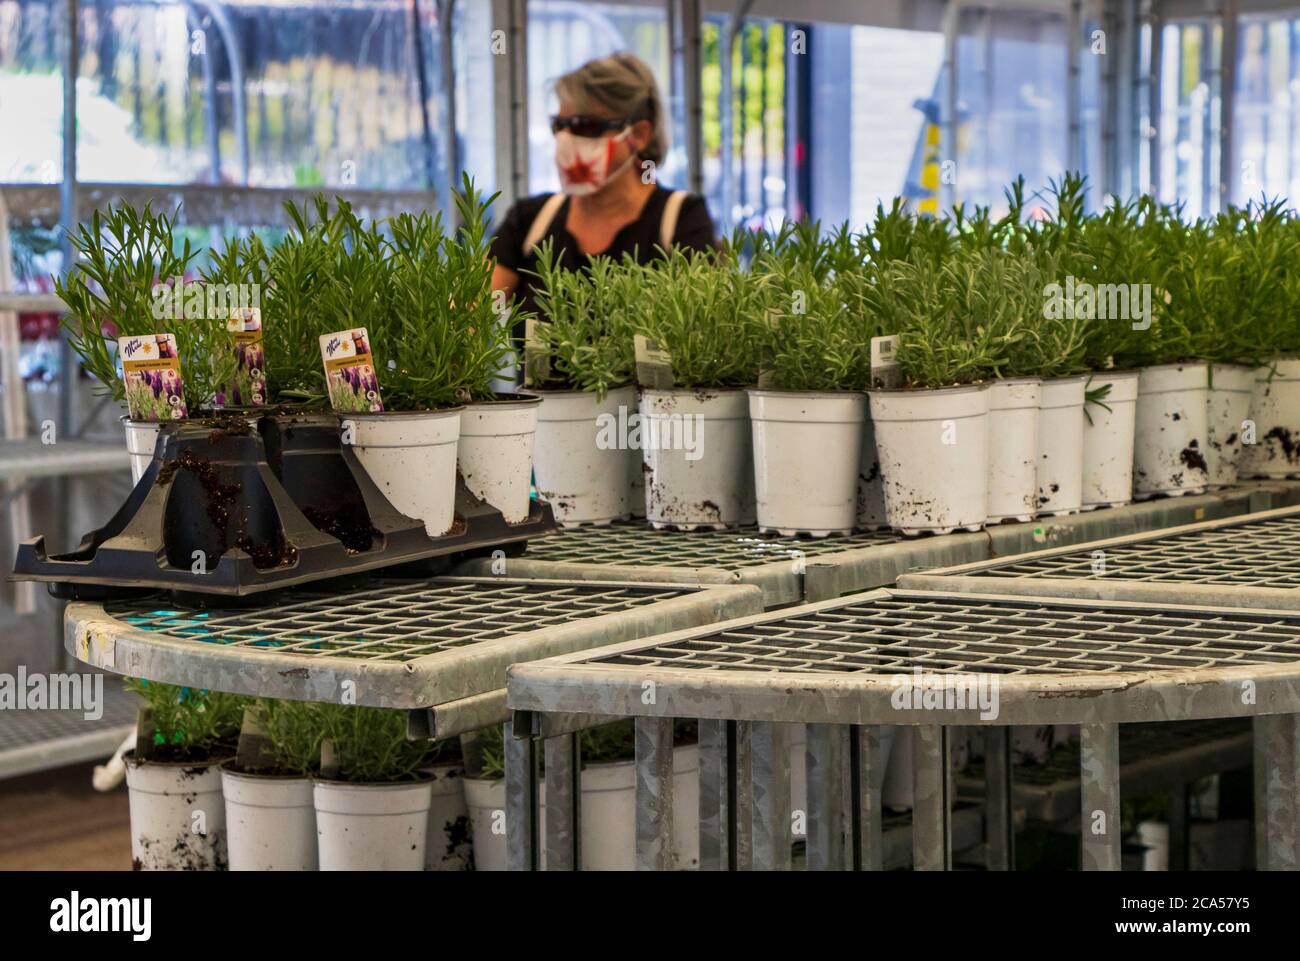 May 2, 2020- Montreal, Canada: Woman wearing a cloth face mask while shopping,herbs pots in foreground at garden center, COVID-19 Coronavirus Pandemic Stock Photo